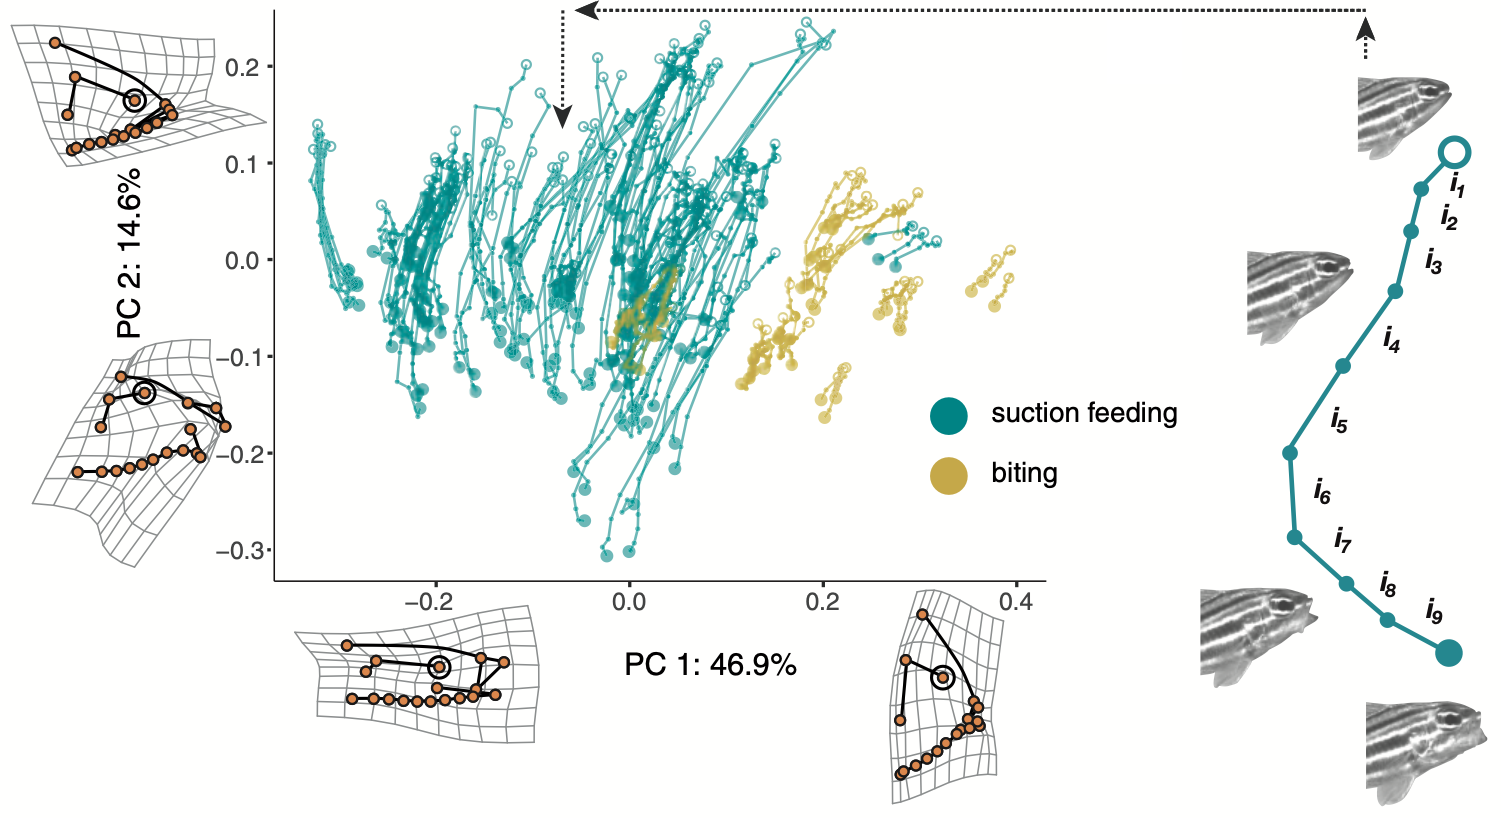 Diversity among the trajectories, or total shapes, of feeding strikes among reef fishes; figure from Corn et al 2021 Syst Biol